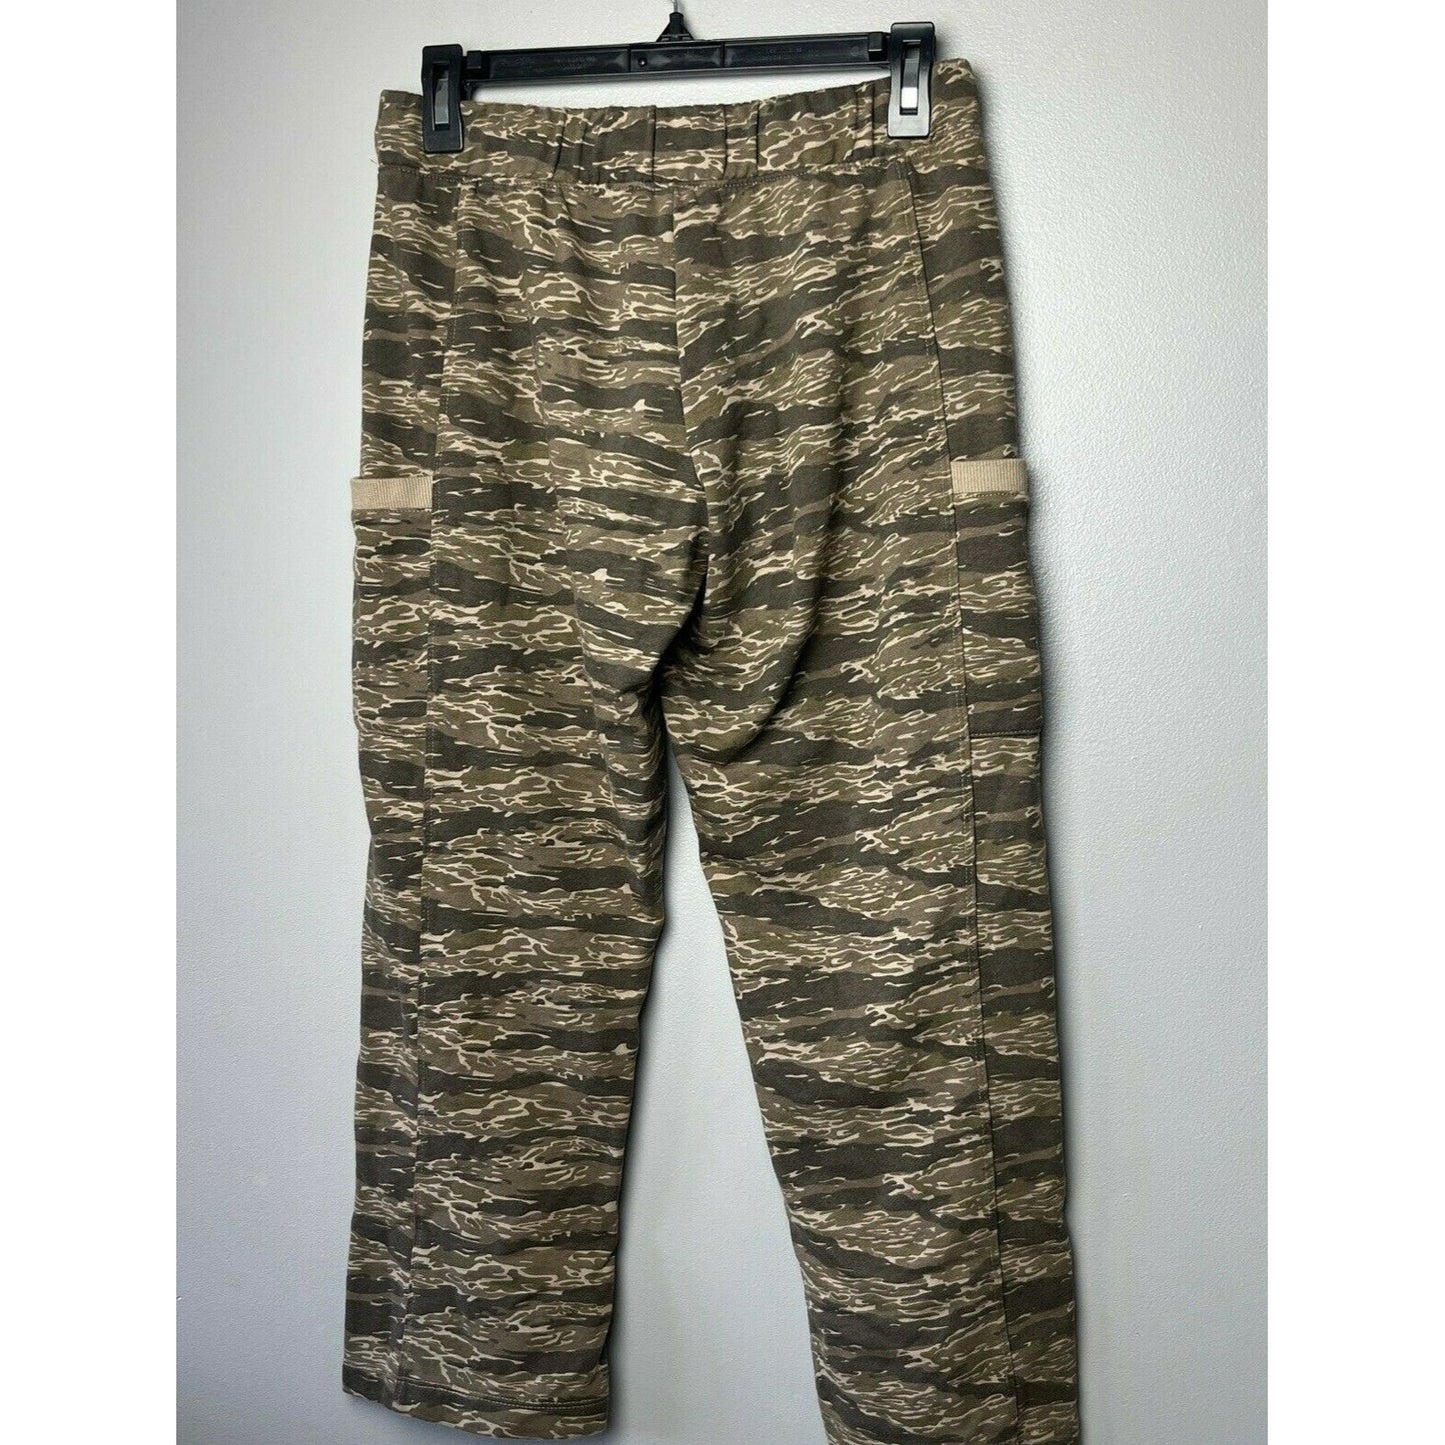 Alternative Sustainable Fatigue Tiger Camo Pants Size S Small NWT